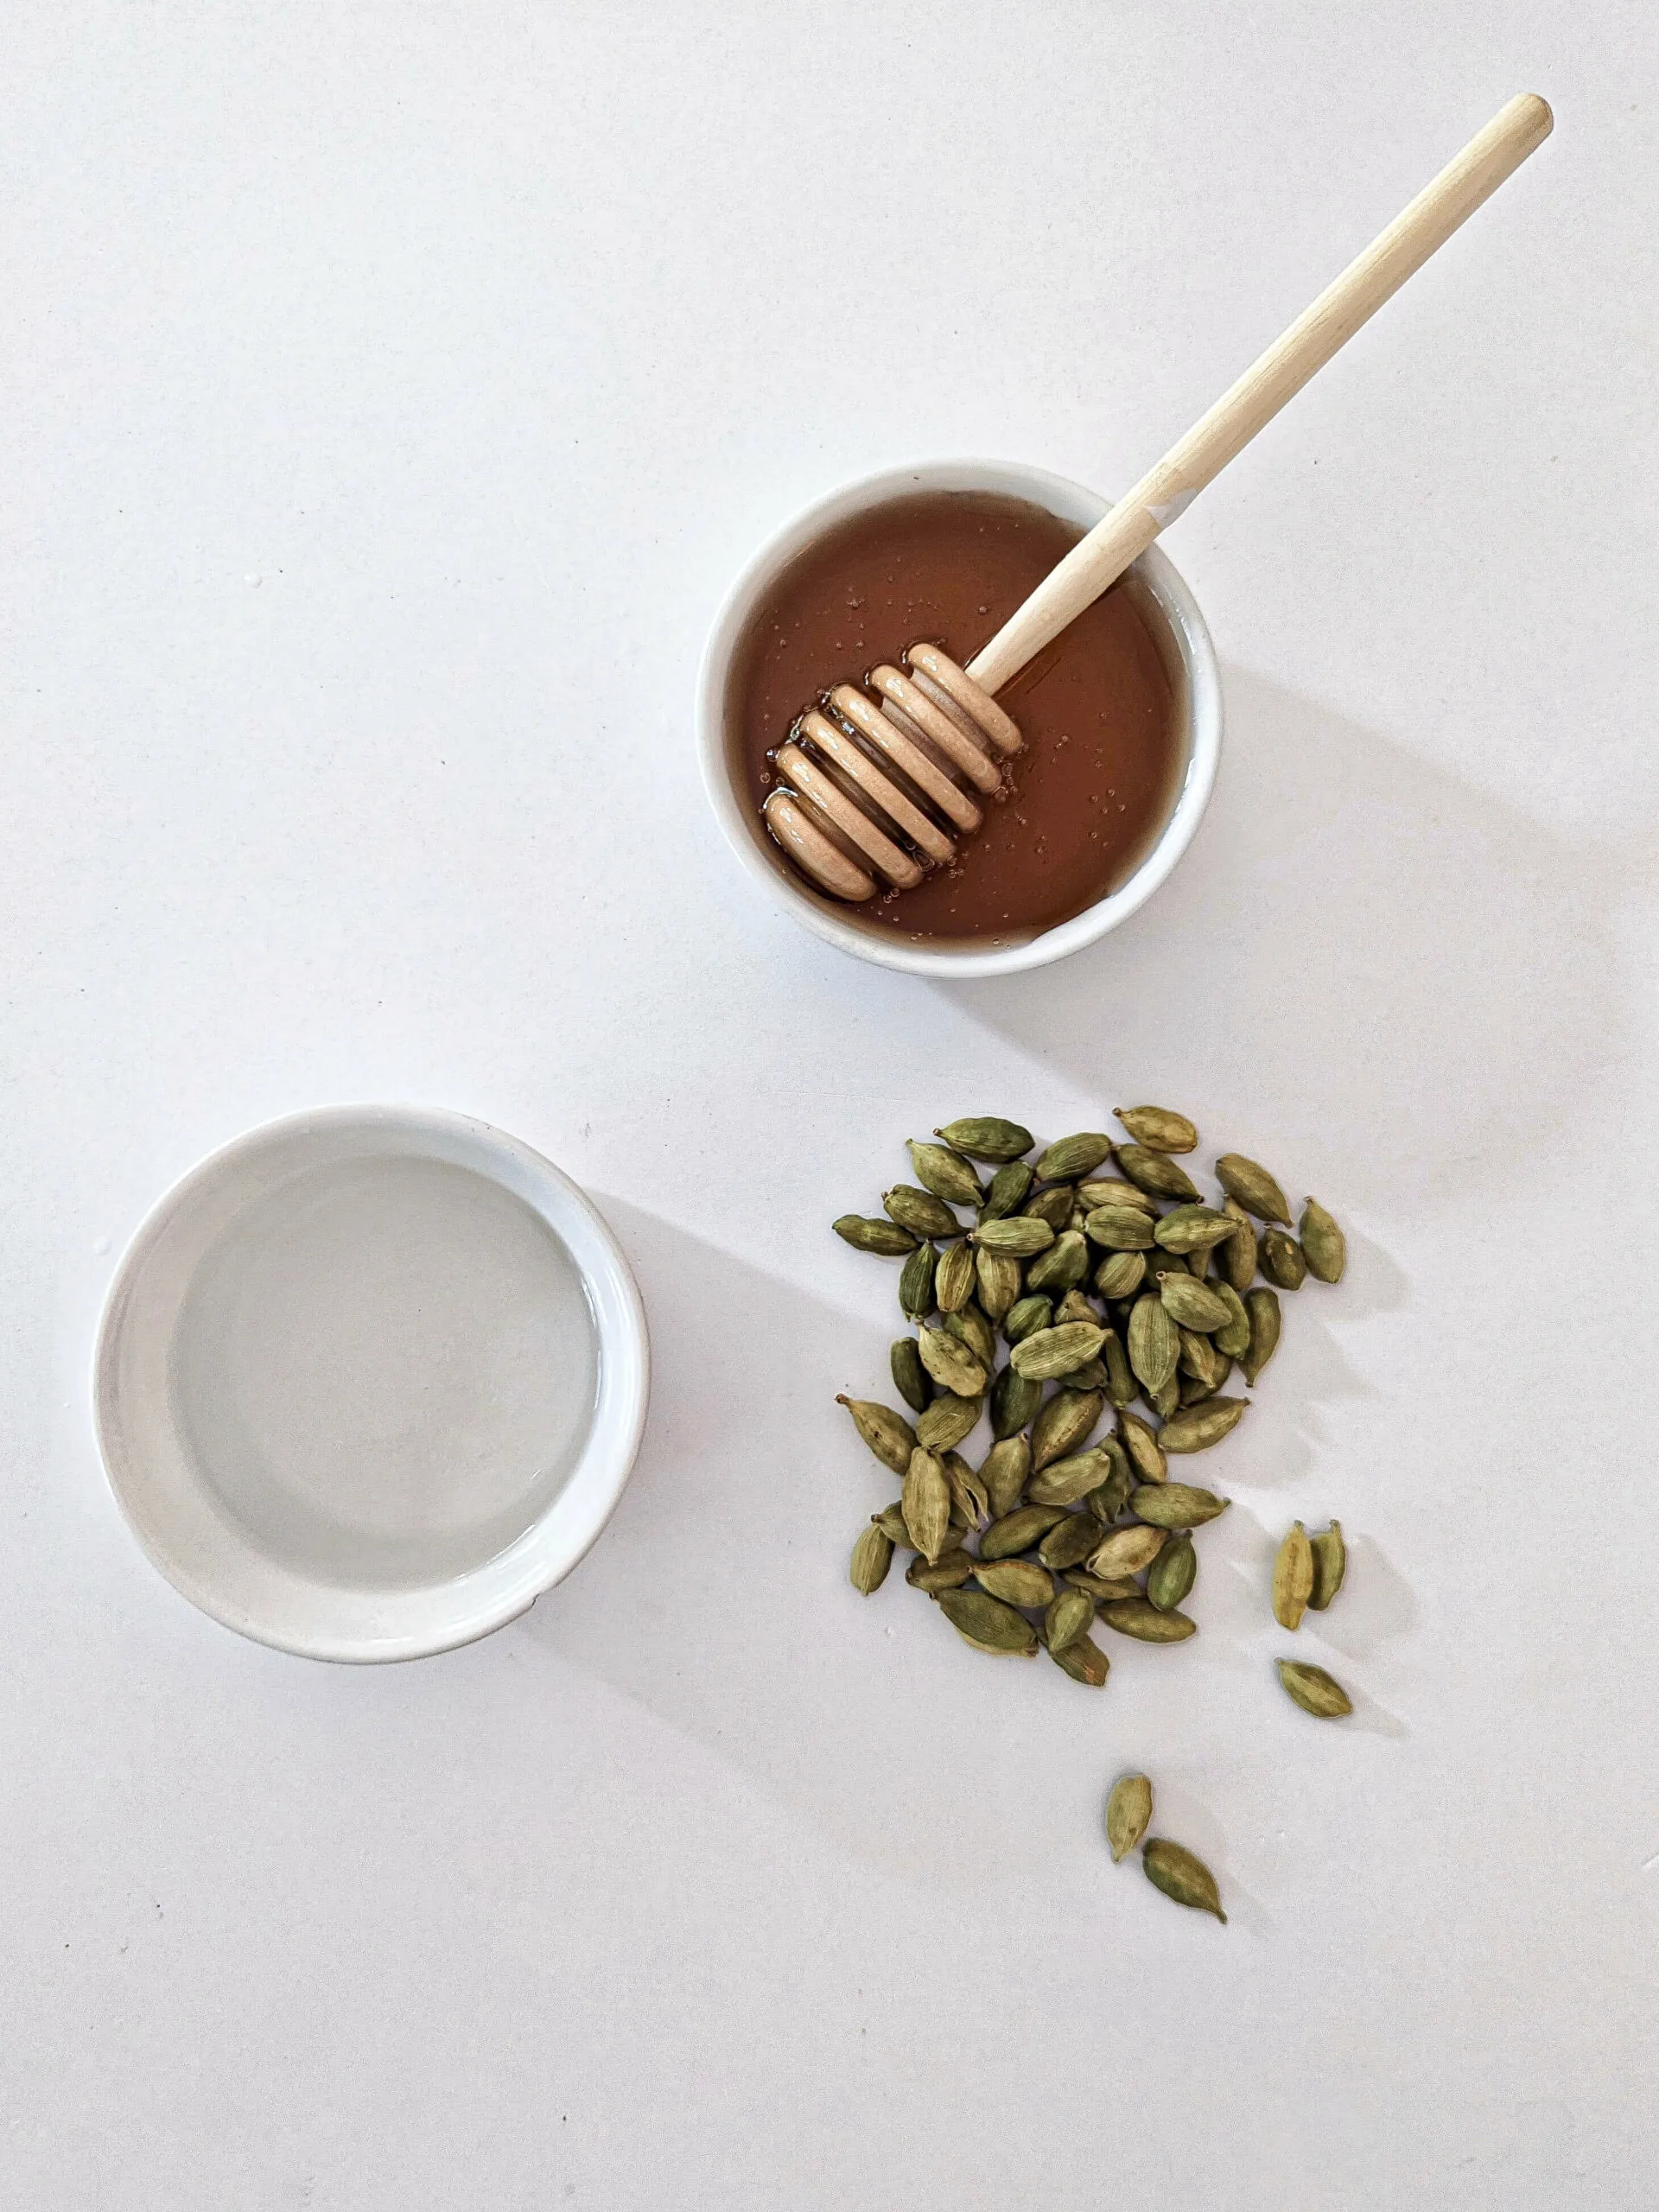 Ingredients for cardamom simple syrup.